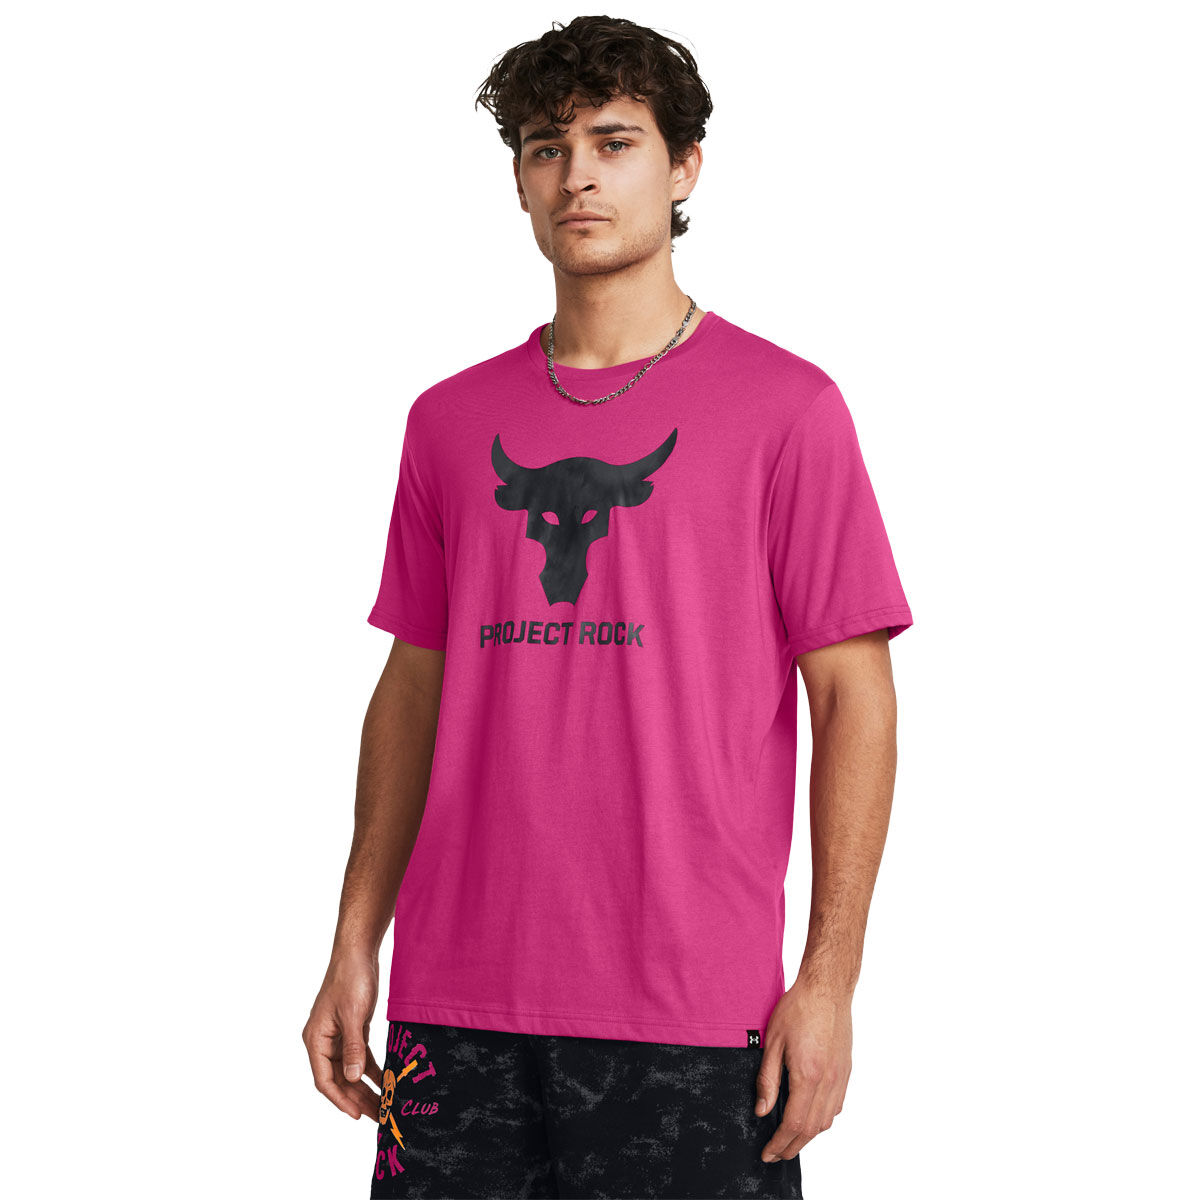 Under Armour Mens Project Rock Payoff Graphic Tee Pink S, Pink, rebel_hi-res